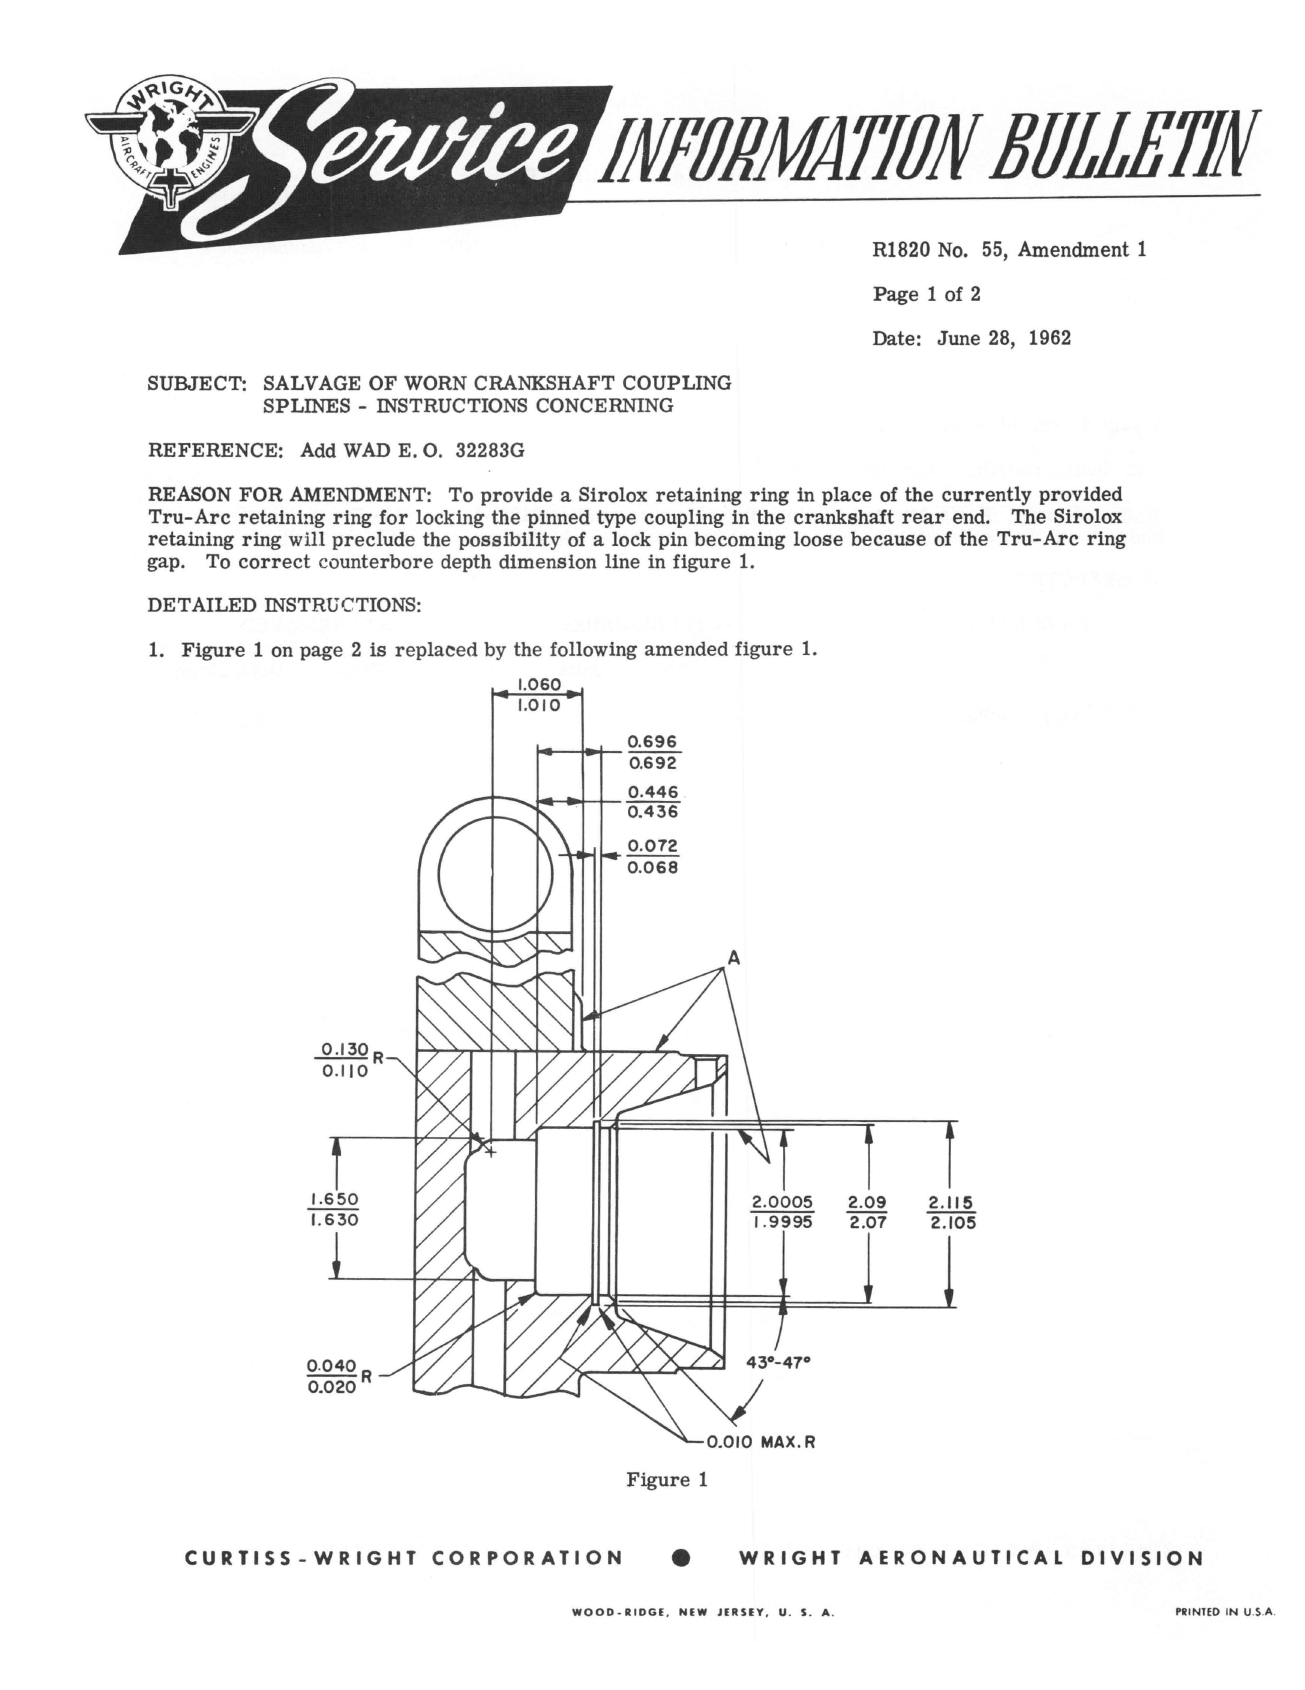 Sample page 1 from AirCorps Library document: Instructions for Salvage of Worn Crankshaft Coupling Splines